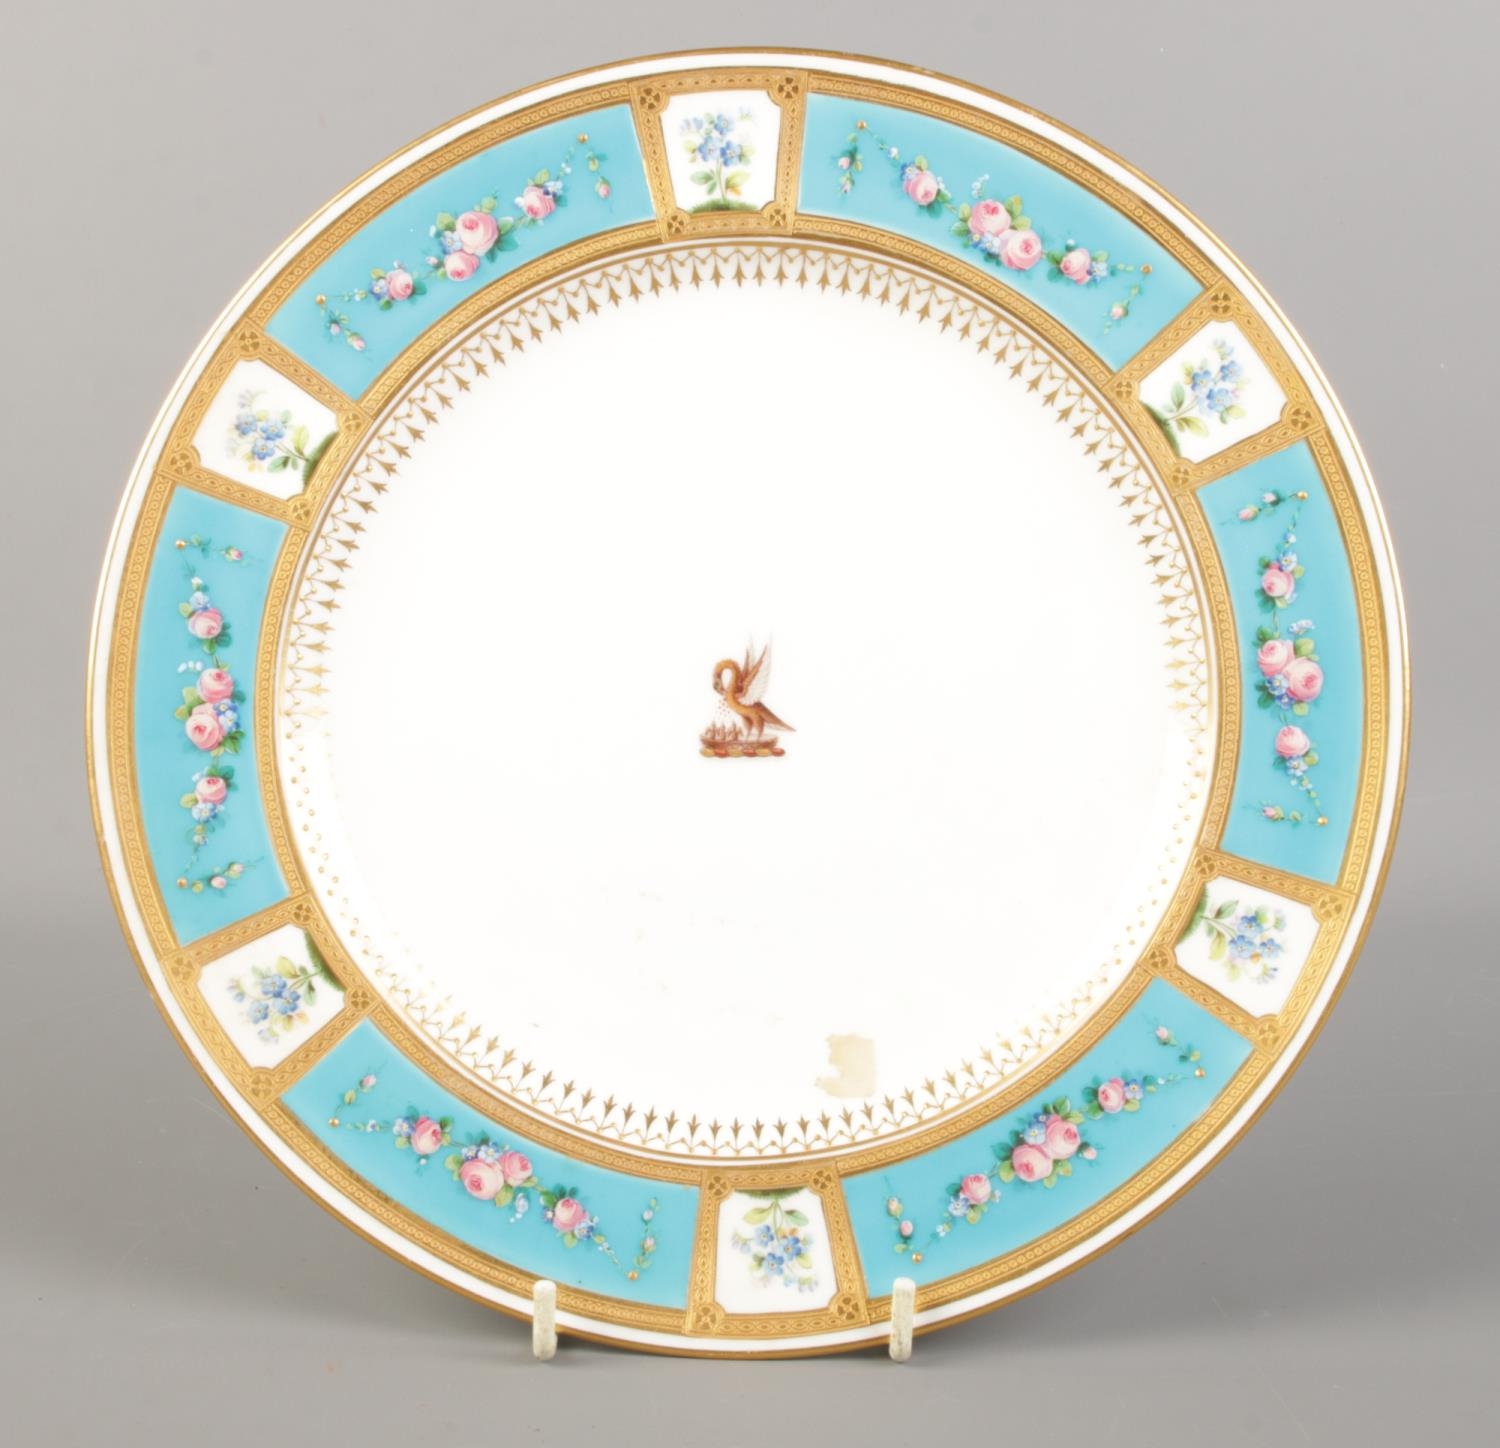 A late 19th century Minton porcelain plate with gilt and turquoise border decorated with hand